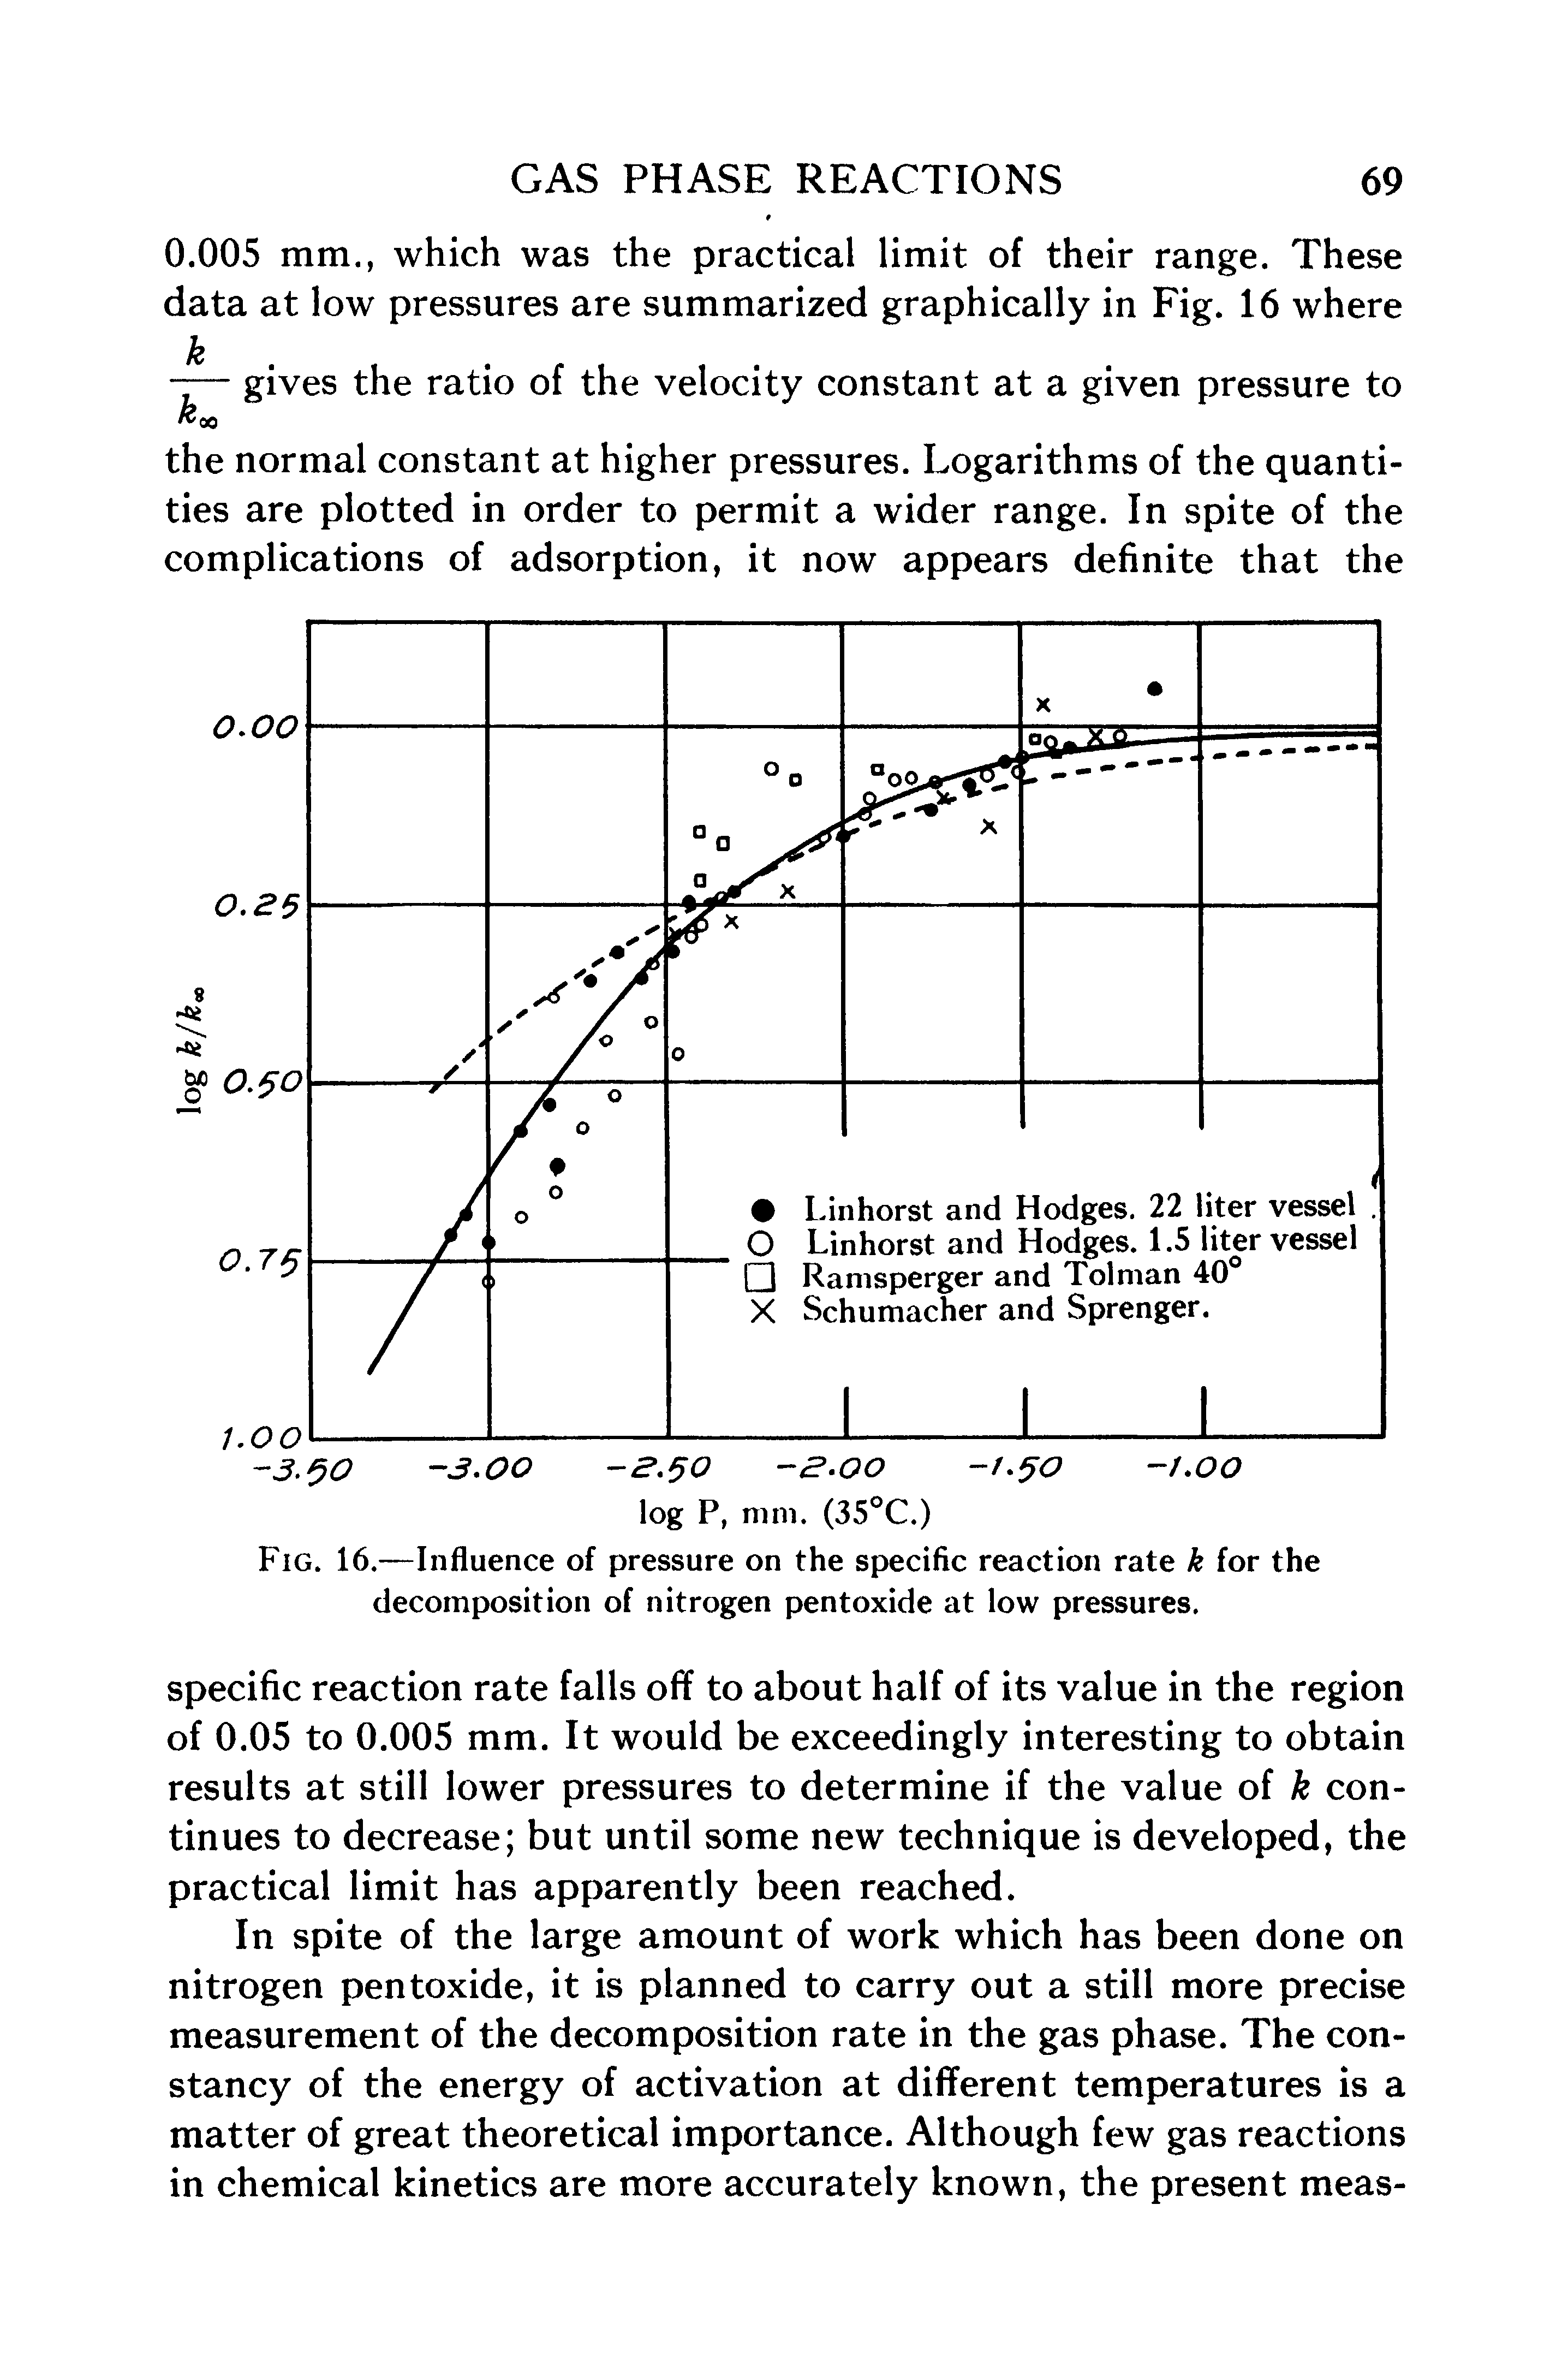 Fig. 16.—Influence of pressure on the specific reaction rate k for the decomposition of nitrogen pentoxide at low pressures.